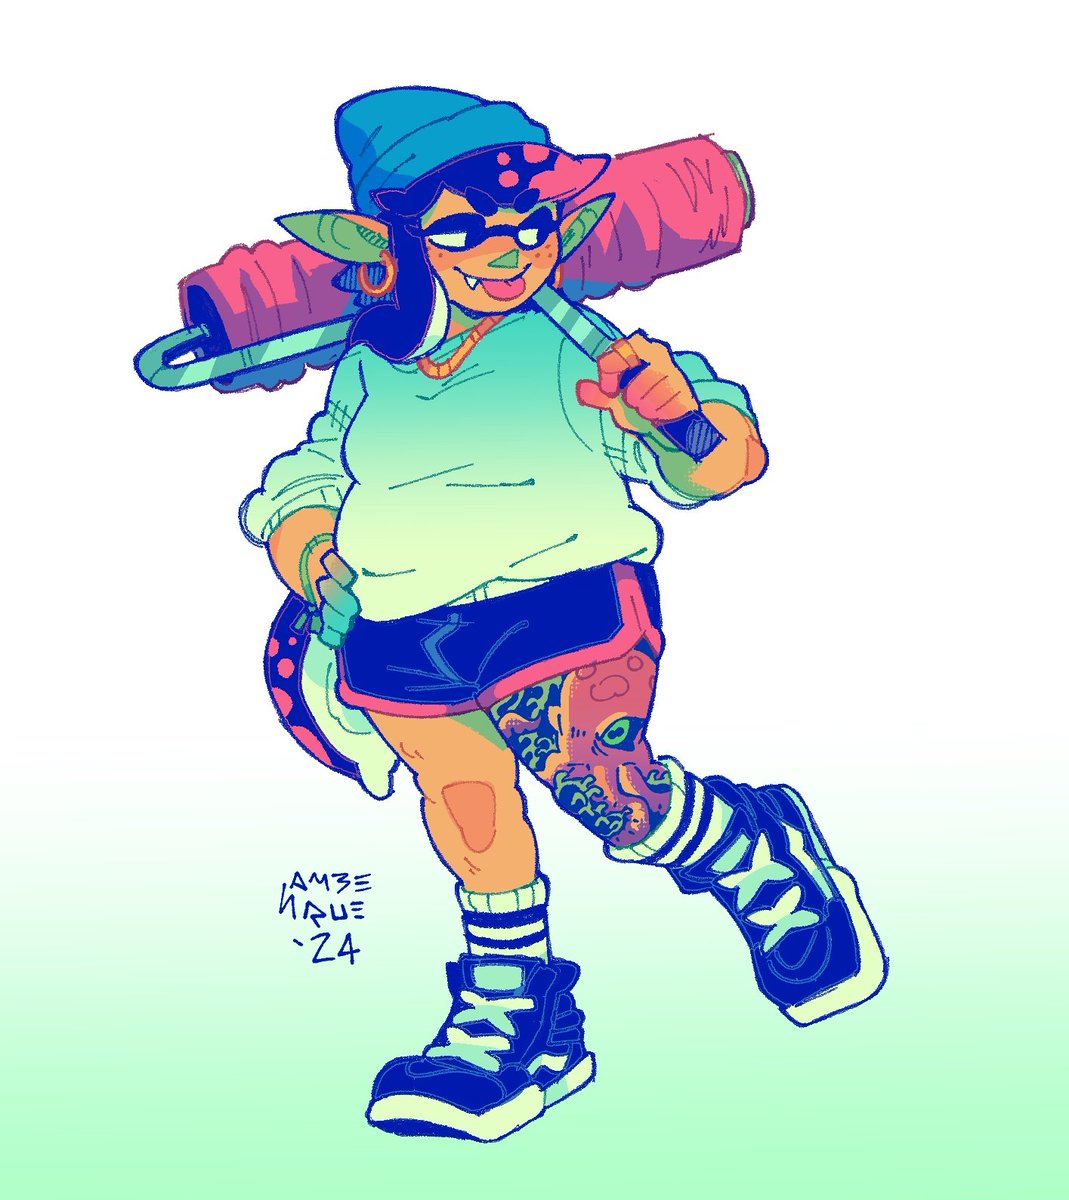 the urge 2 draw callie splatoon was stronger than me